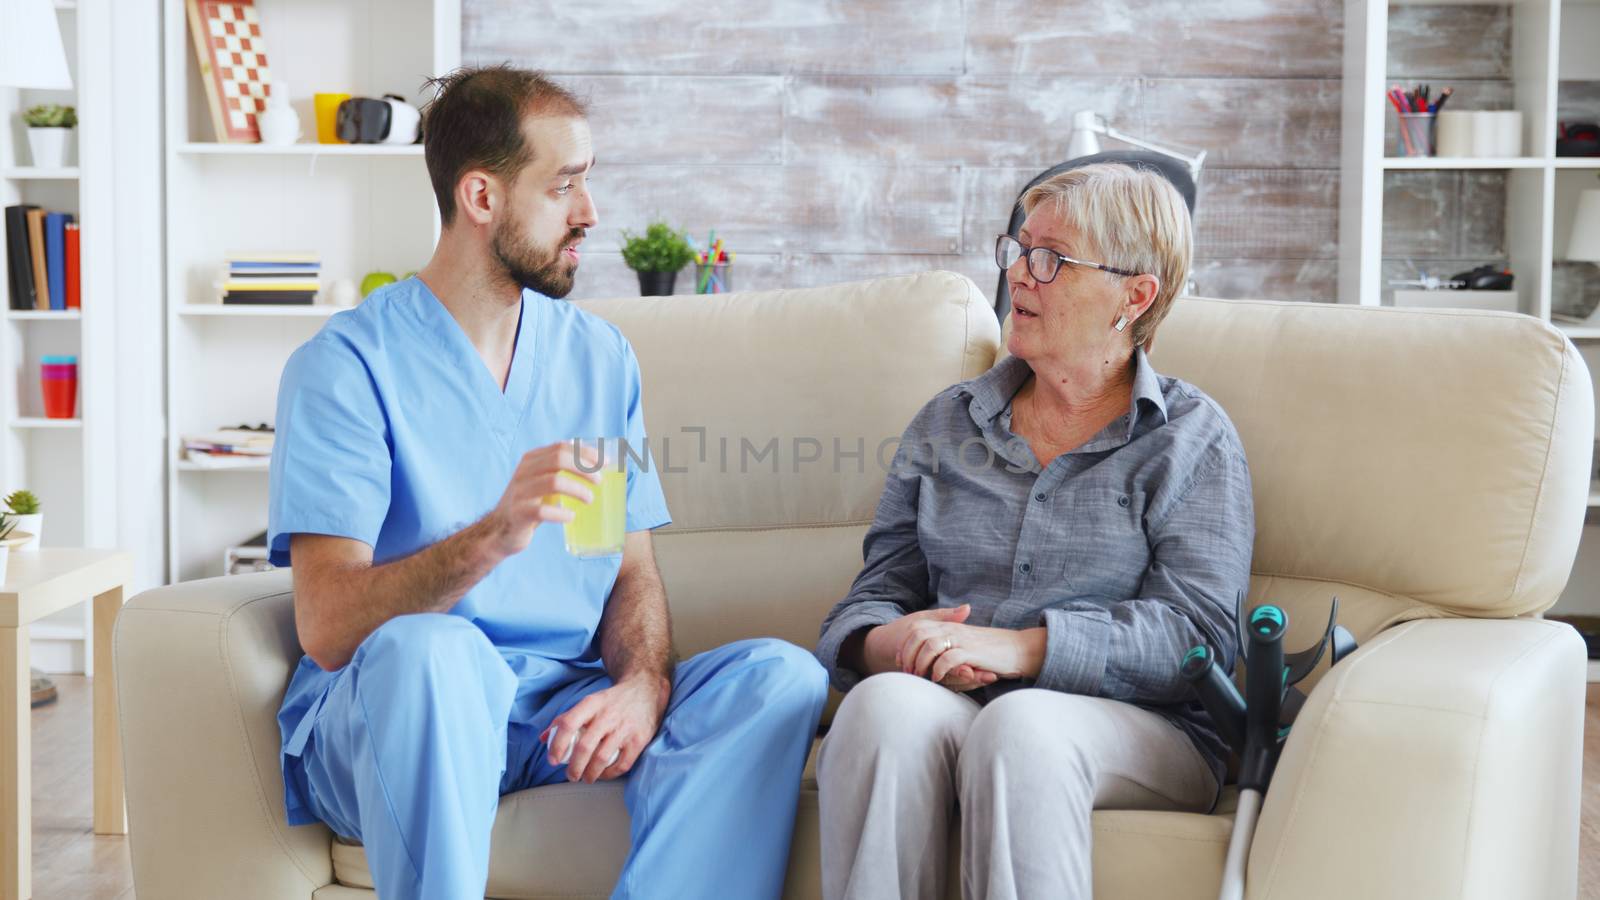 Male nurse sitting on couch with senior woman giving her medical treatment in nursing home by DCStudio